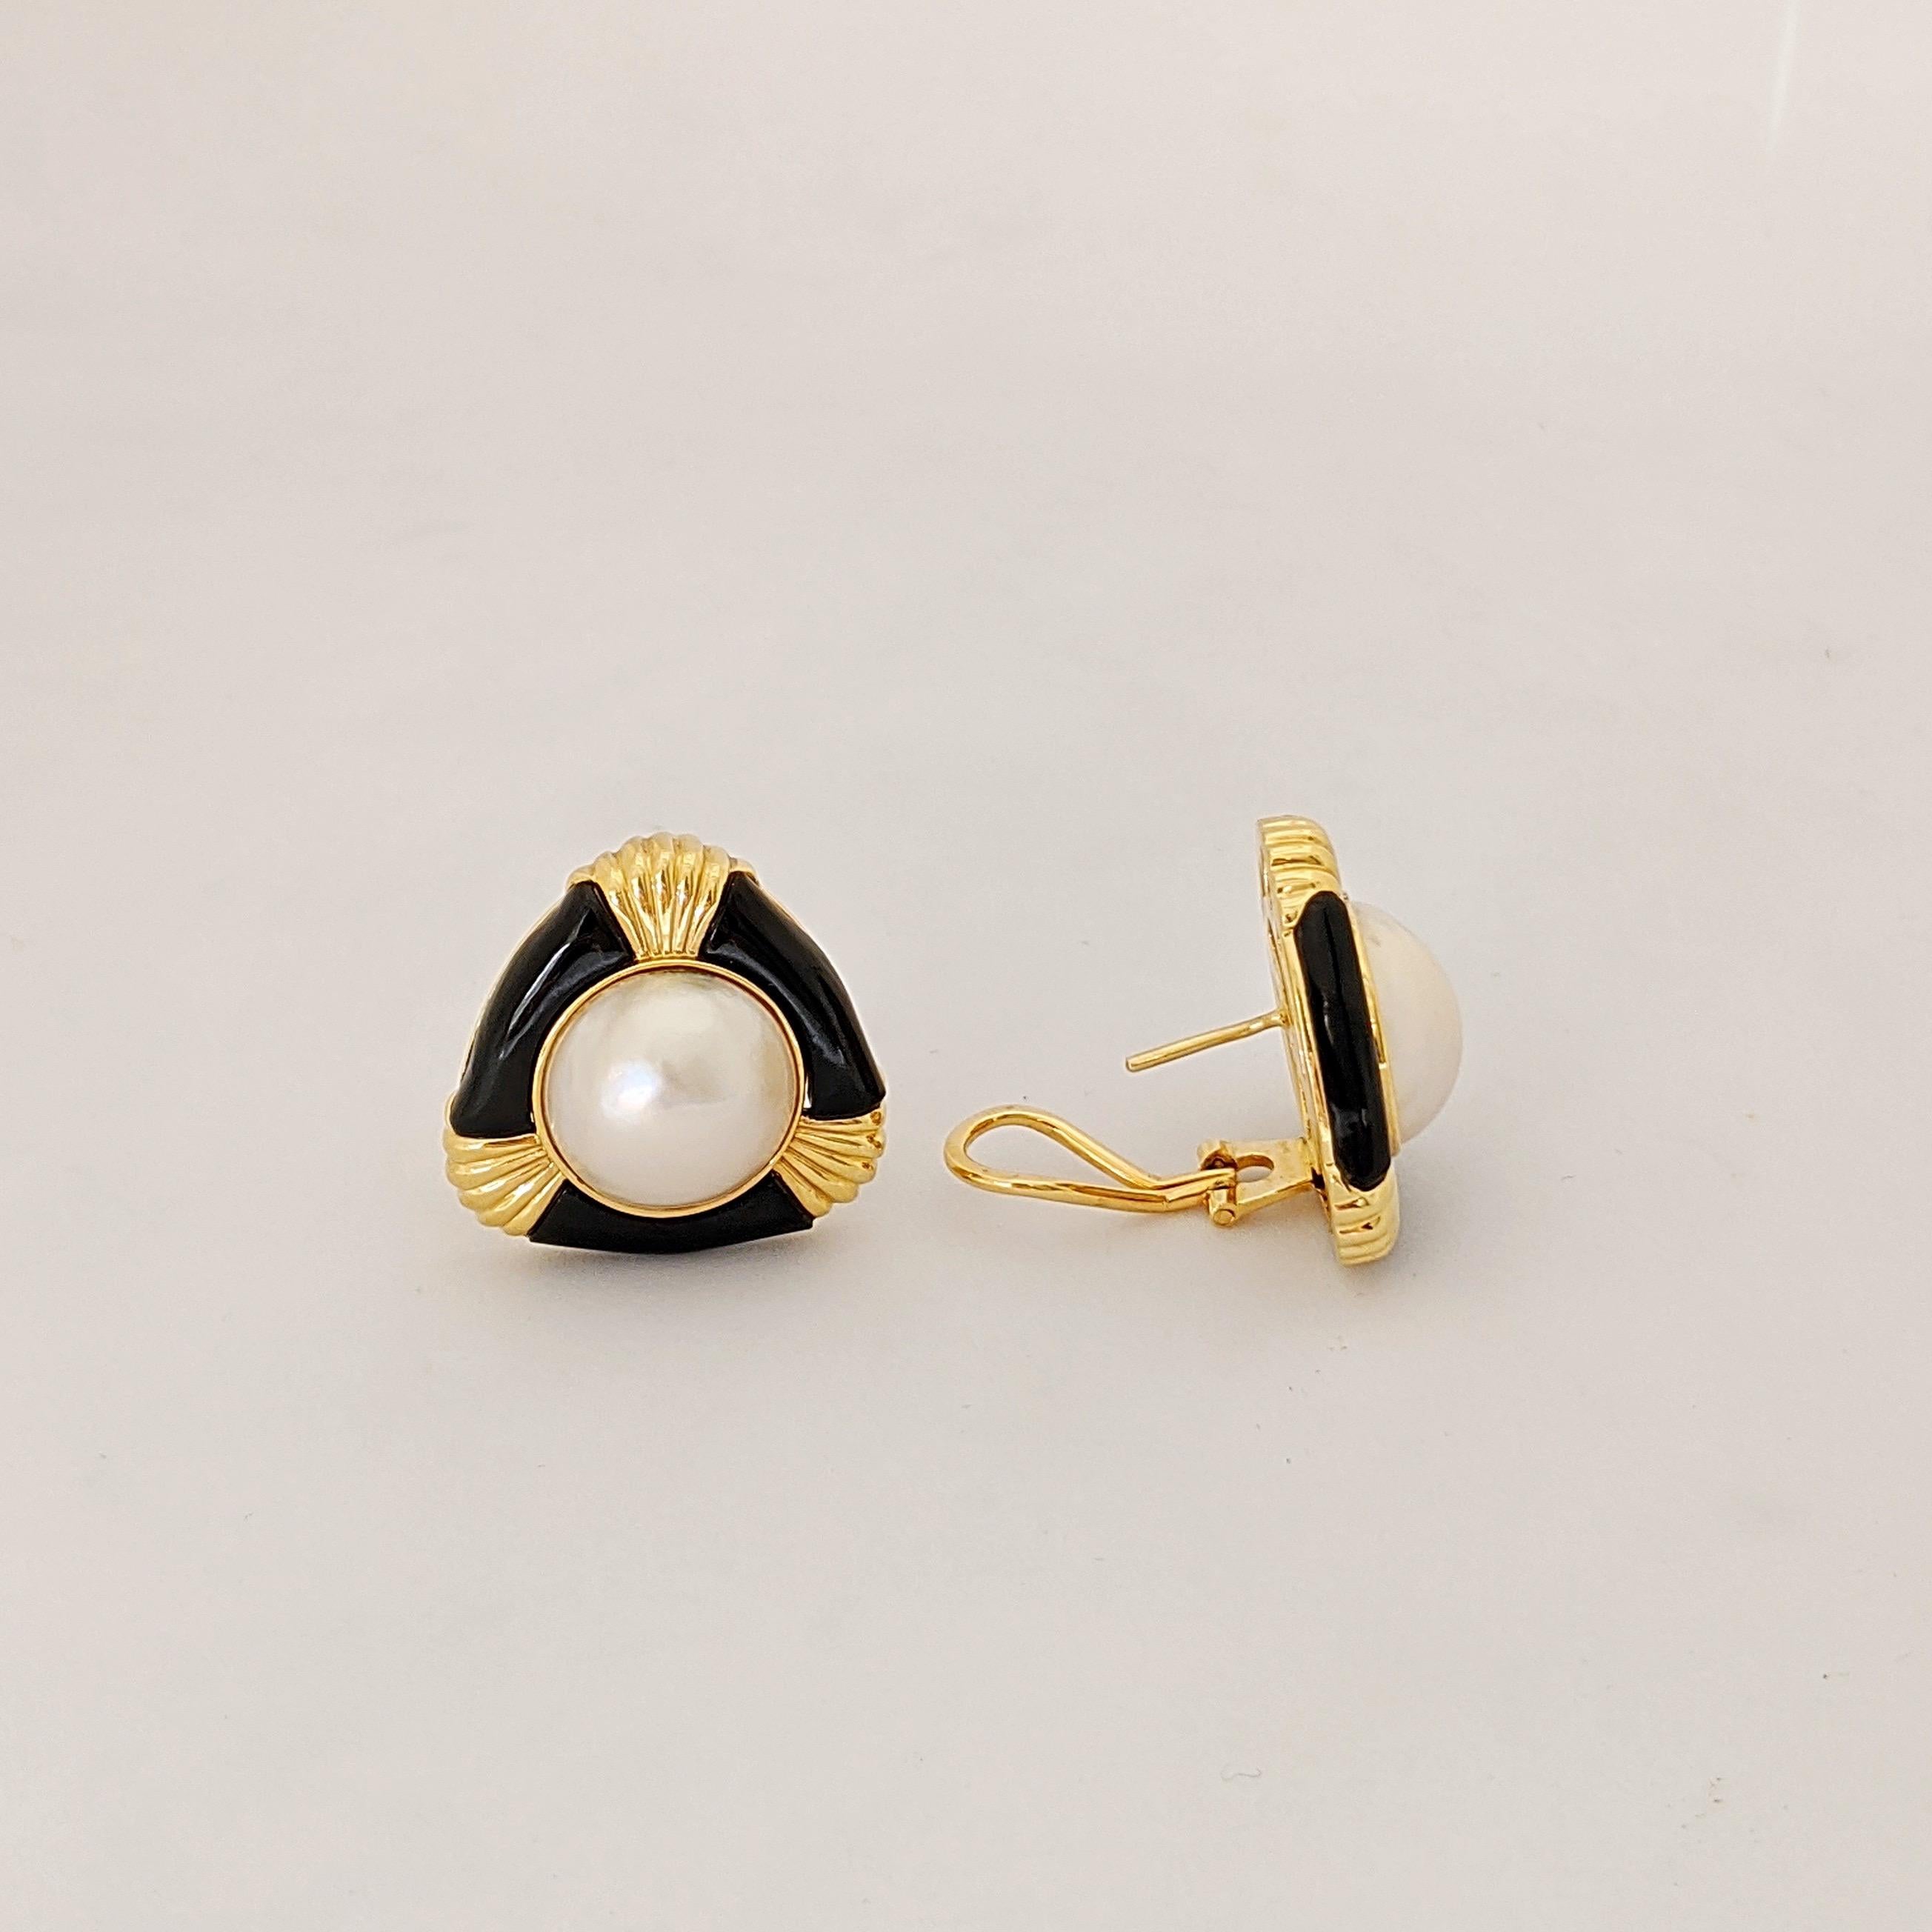 This Retro earring centers a Mabe Pearl accented with Black Onyx and 14 karat yellow gold. The triangular shaped earring measures approximately 1